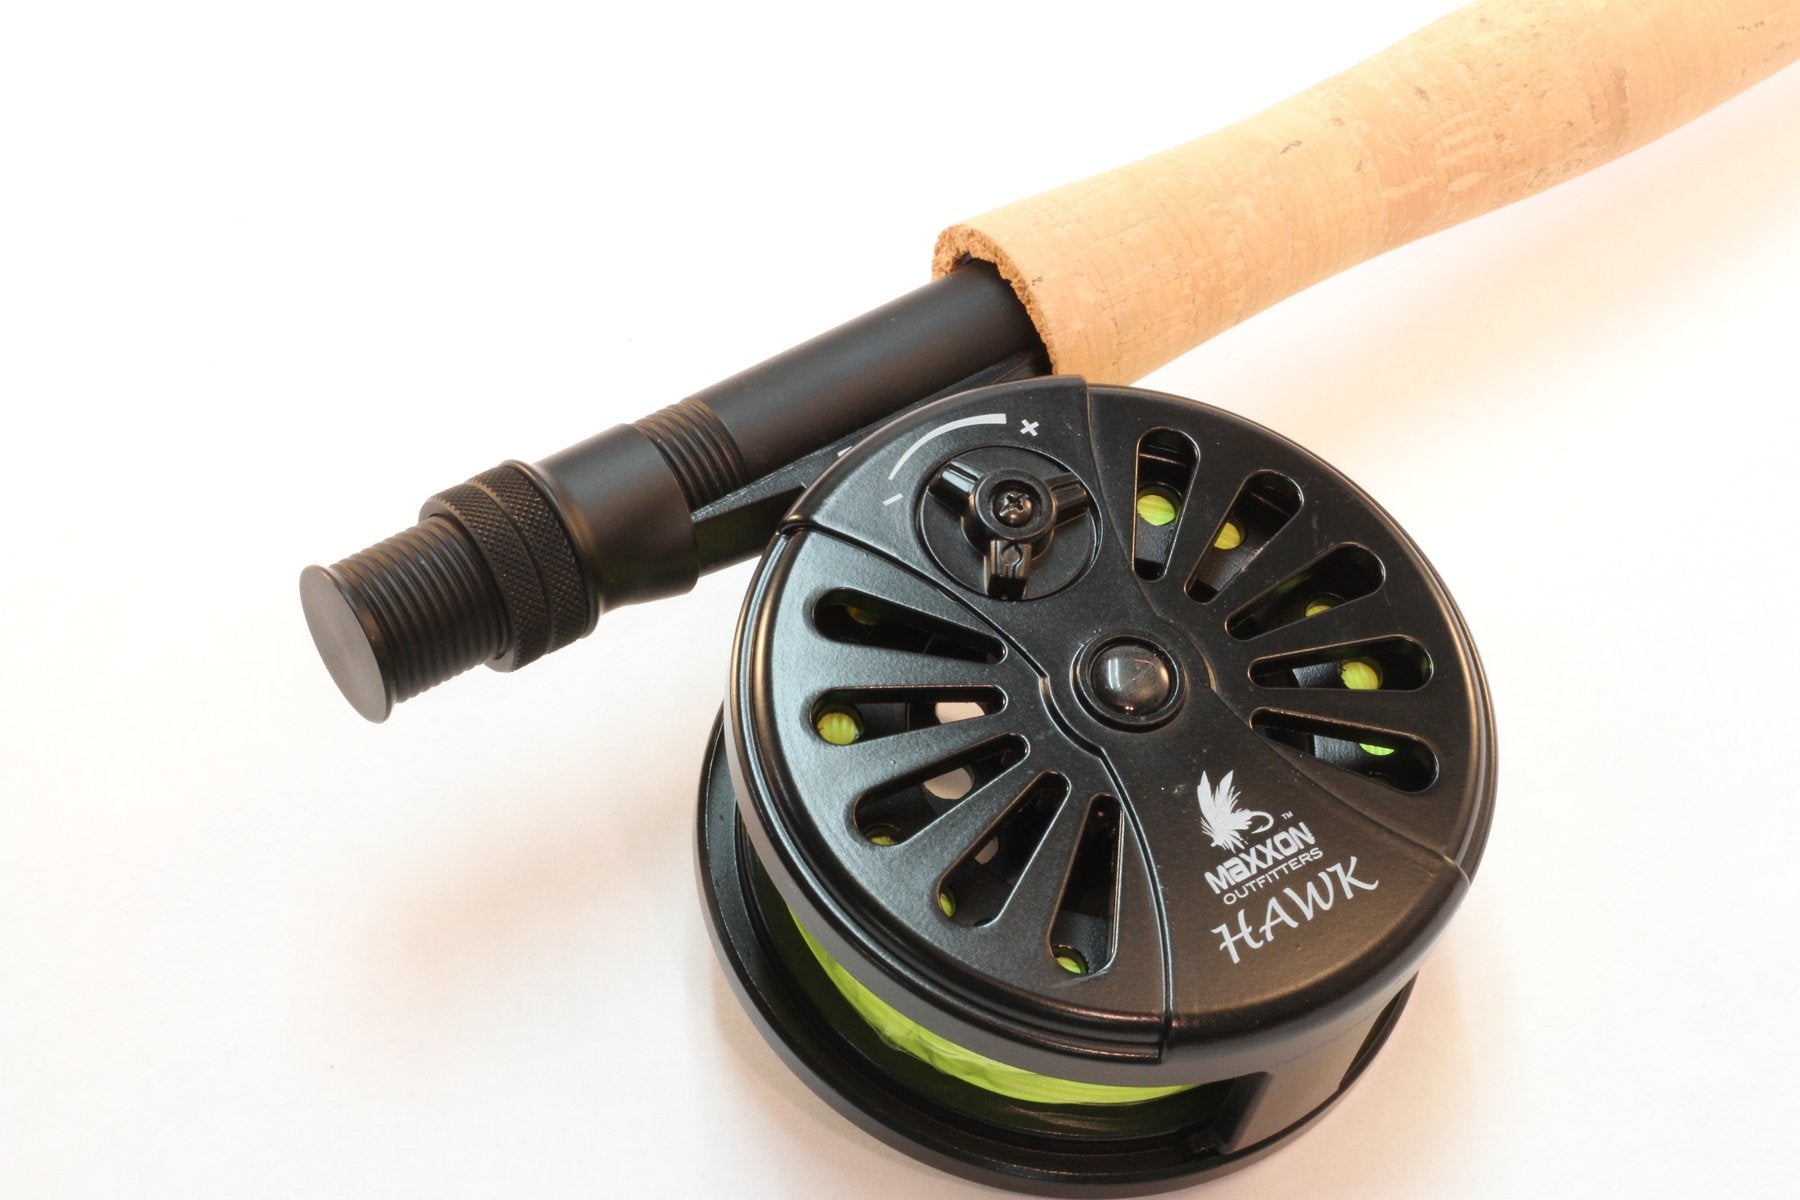 TS-2™ - Trout Stalker™ Fly Rod/Reel Outfit